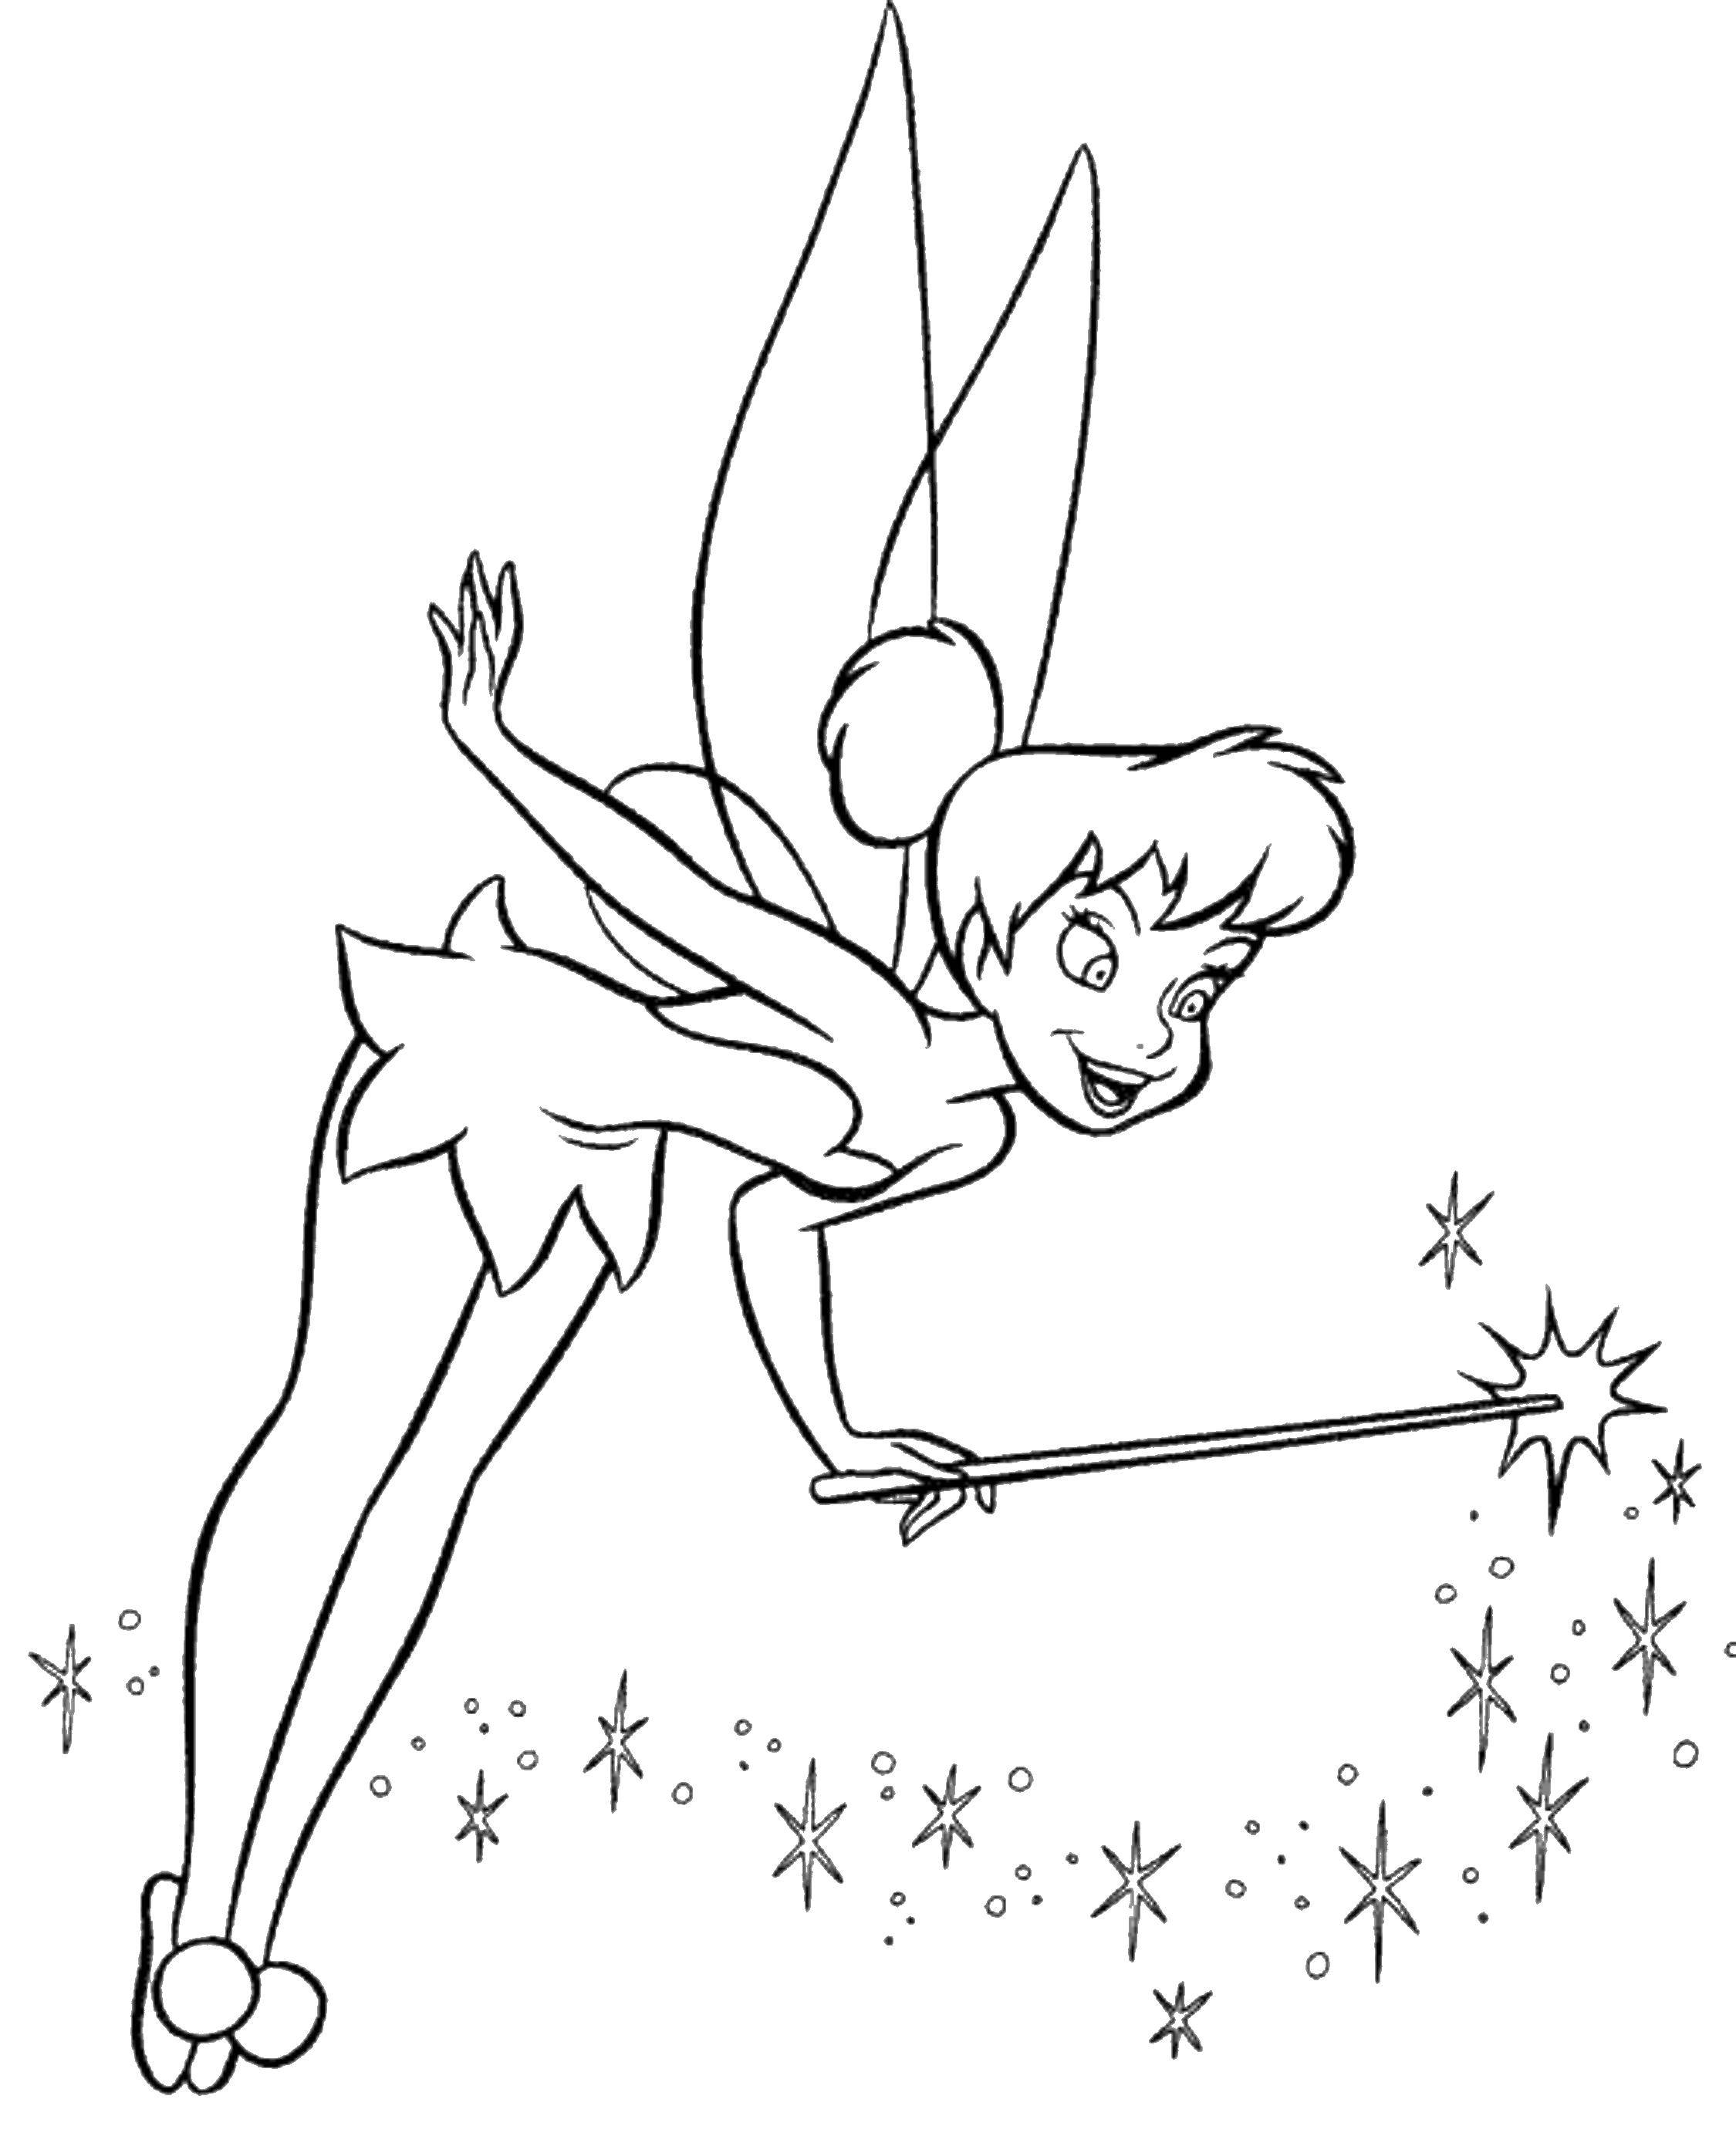 Coloring Tinker bell from disney fairies .. Category fairies. Tags:  Fairy, forest, fairy tale.